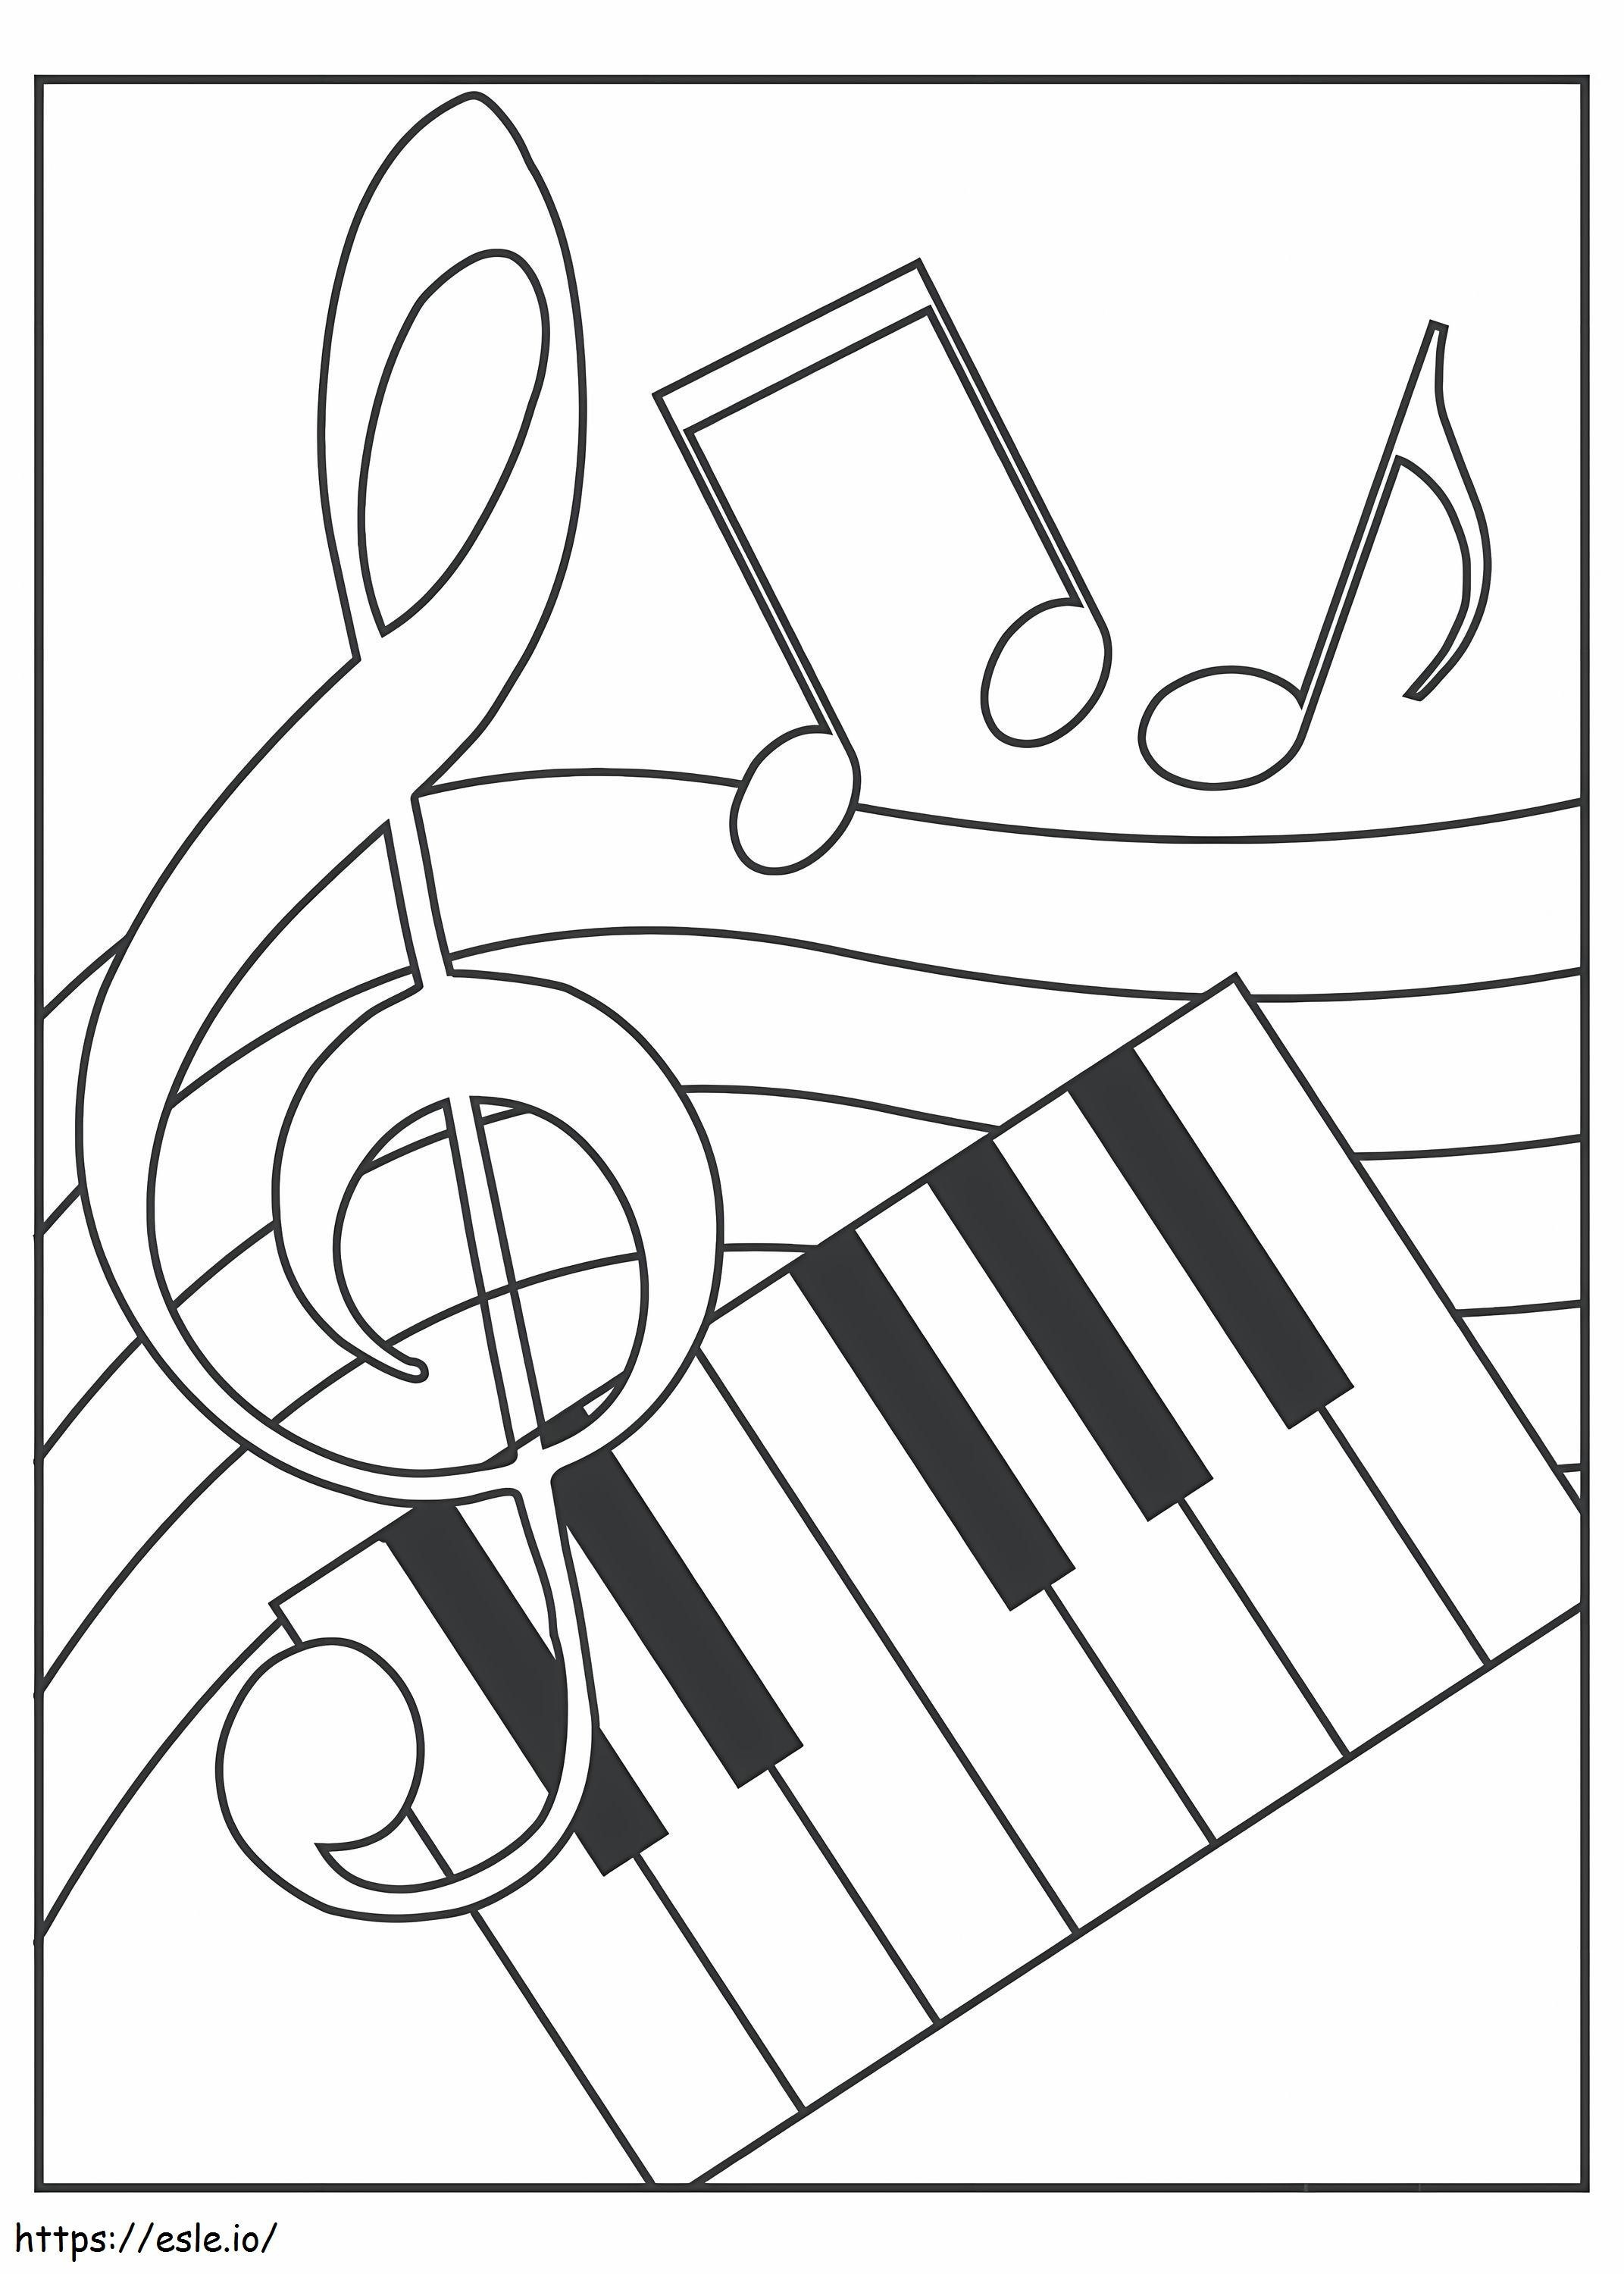 Great Musical Instrument coloring page